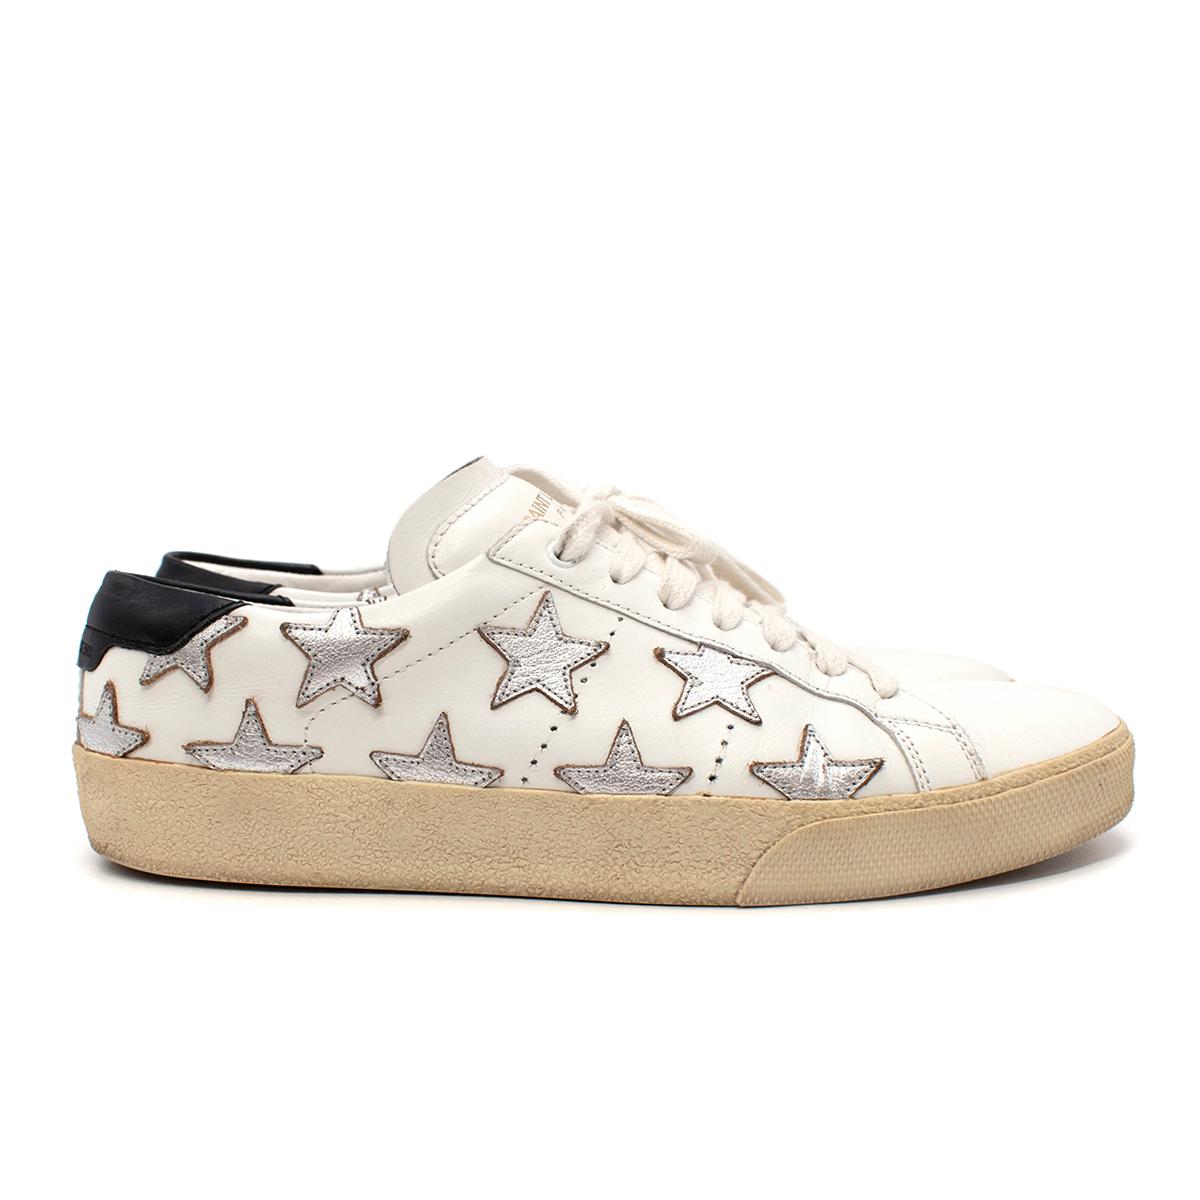 Saint Laurent White California Court Classic Star Sneakers

- Signature court-inspired sneaker by Saint Laurent featuring a thick platform rubber sole and all-white leather body decorated with metallic silver stars
- Tonal white elasticated laces
-